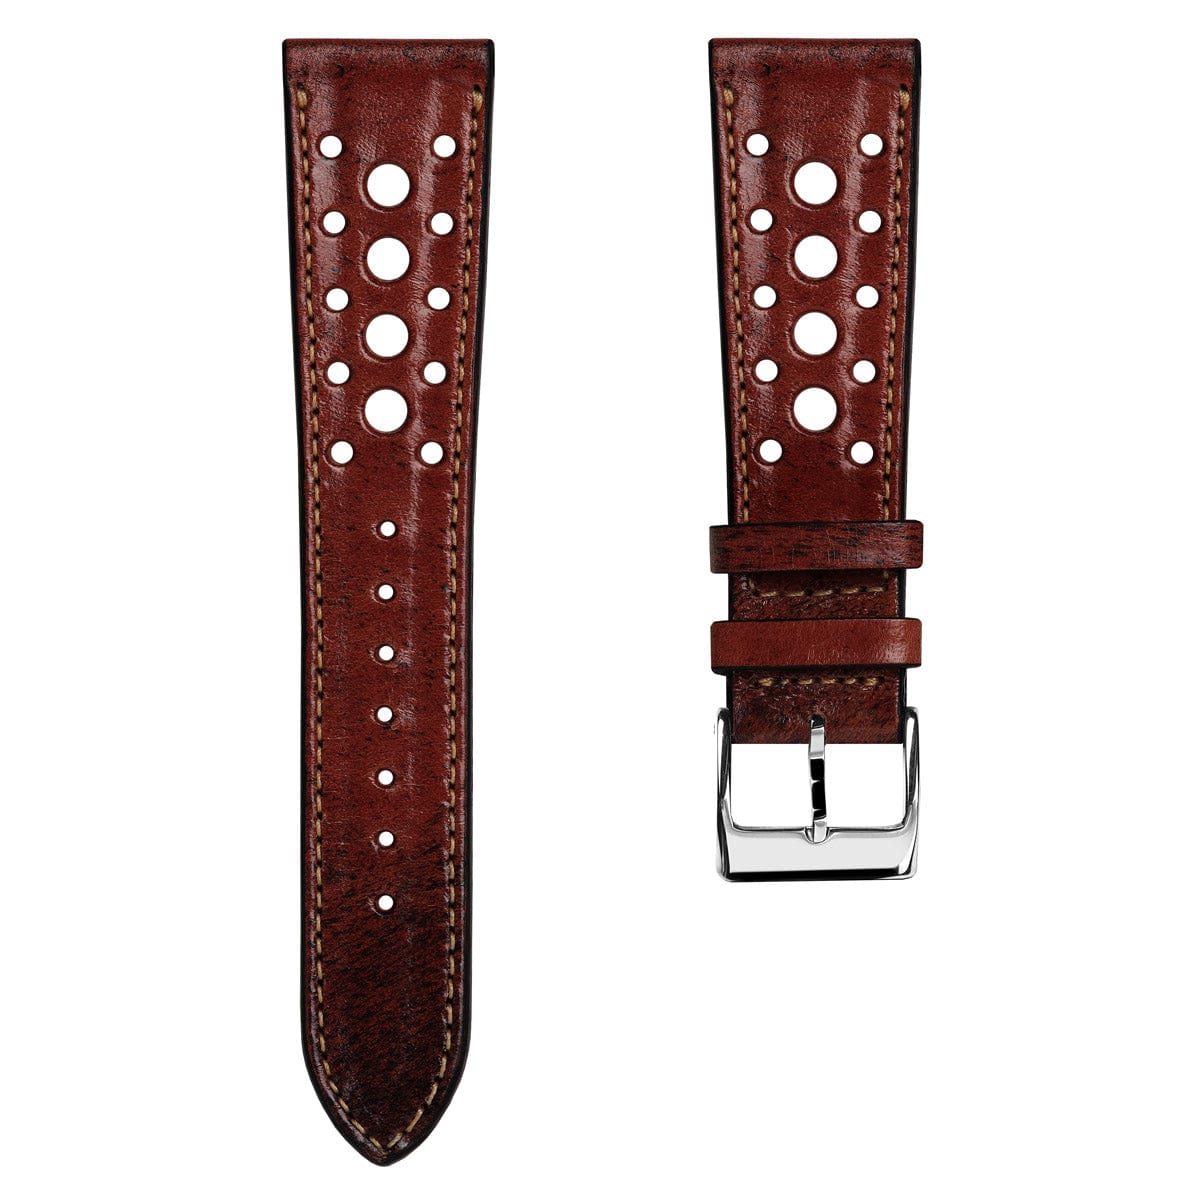 watch-straps-radstock-racing-style-genuine-leather-watch-strap-vintage-red-37329788928163_3000x.jpg